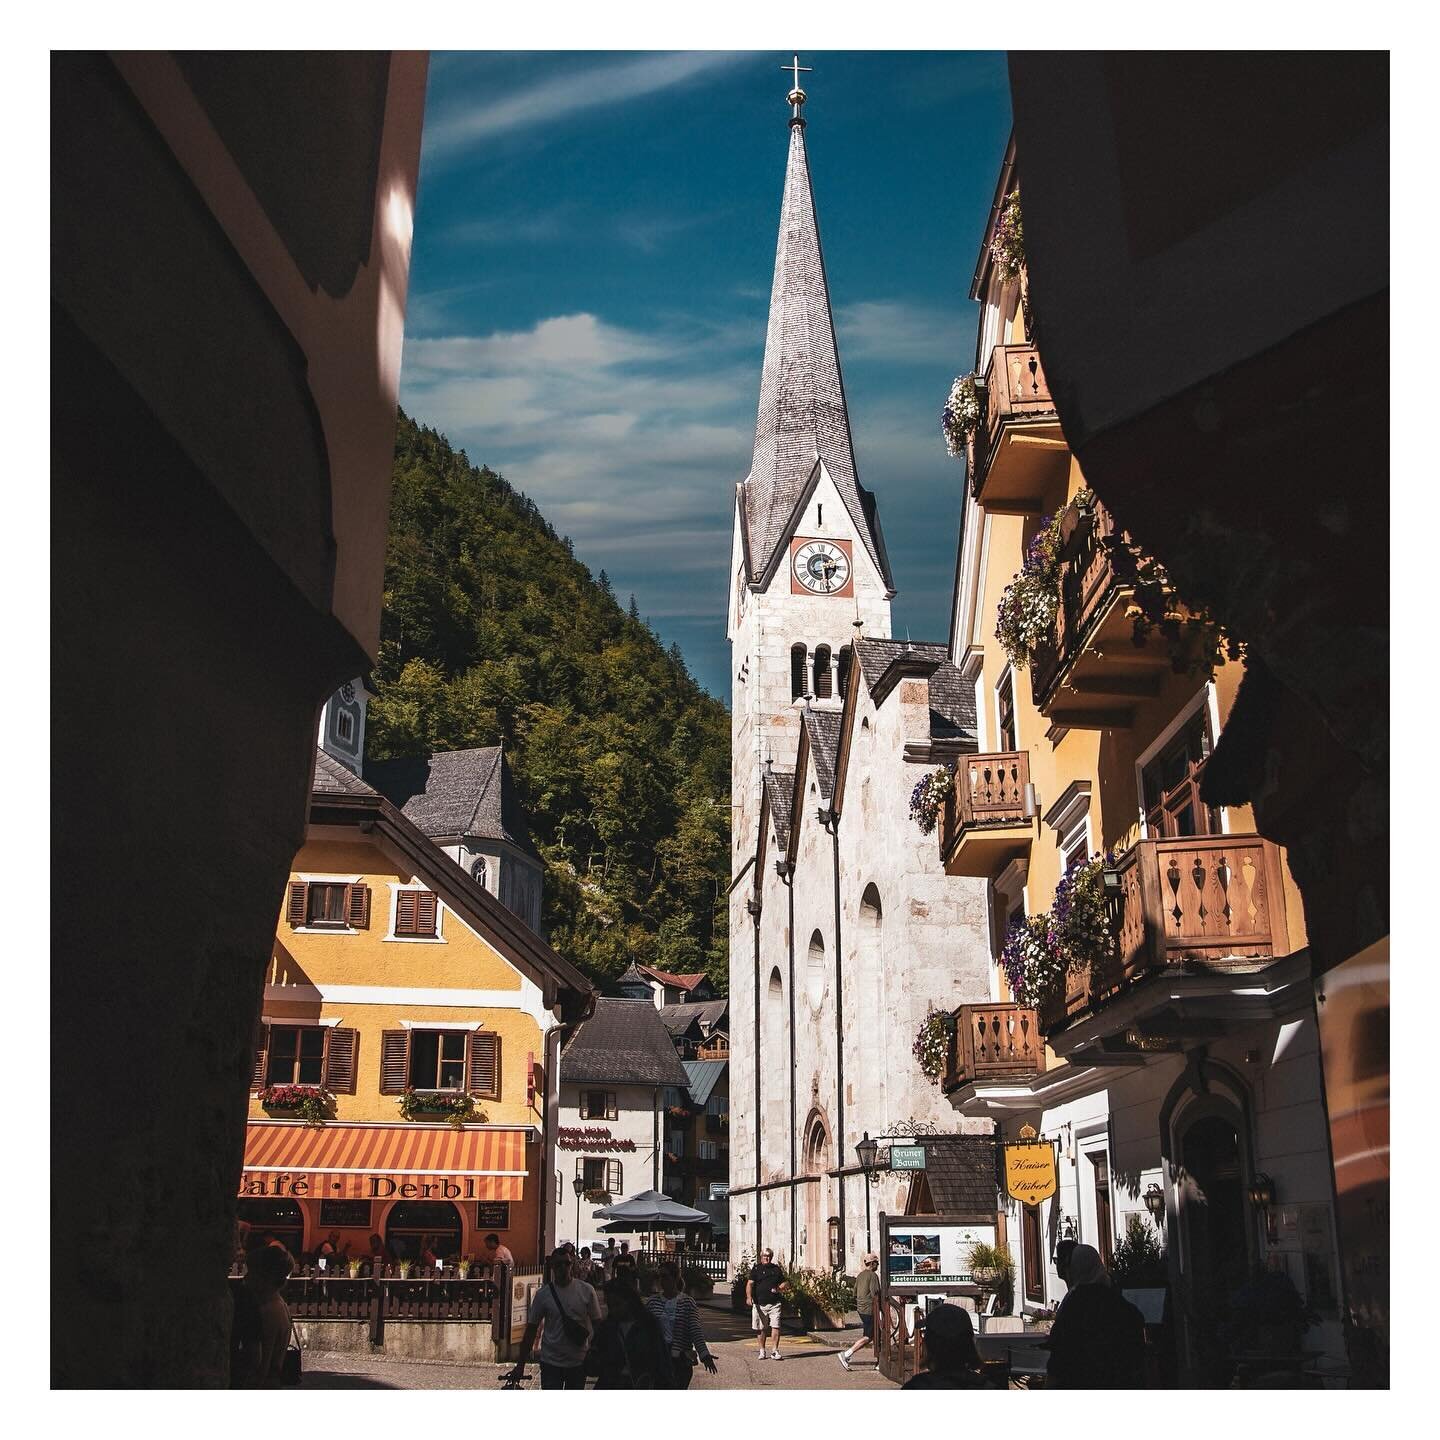 The market square of the UNESCO World Heritage town is definitely one of the nicest places in Hallstatt. Each year guests, from around the world, meet at the historic square, surrounded by picturesque little houses. Here visitors will find cosy cafes